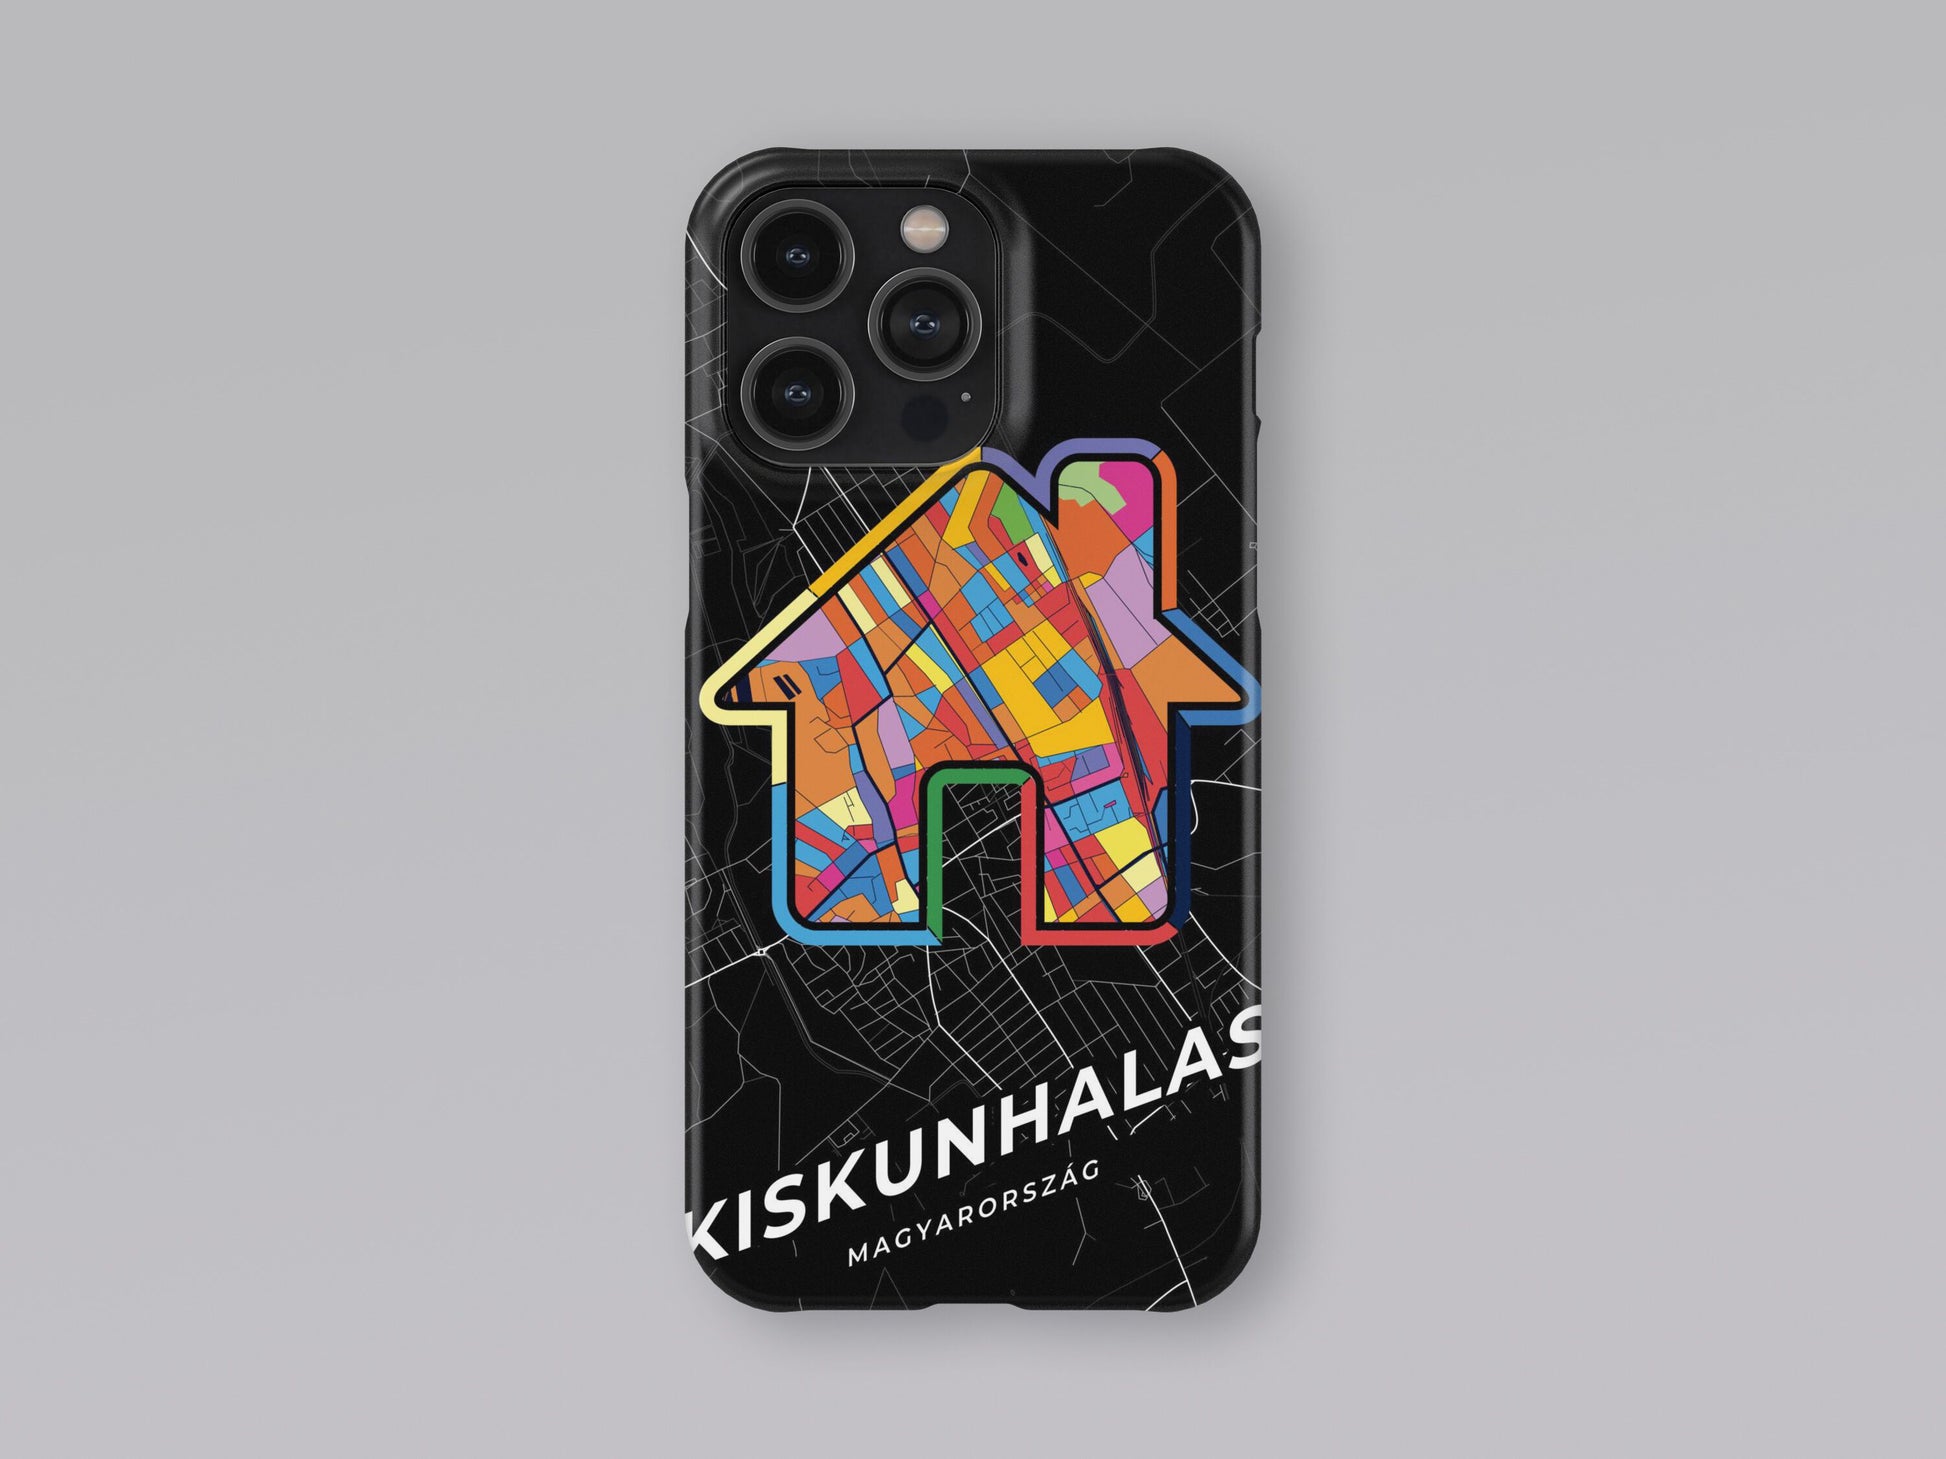 Kiskunhalas Hungary slim phone case with colorful icon. Birthday, wedding or housewarming gift. Couple match cases. 3